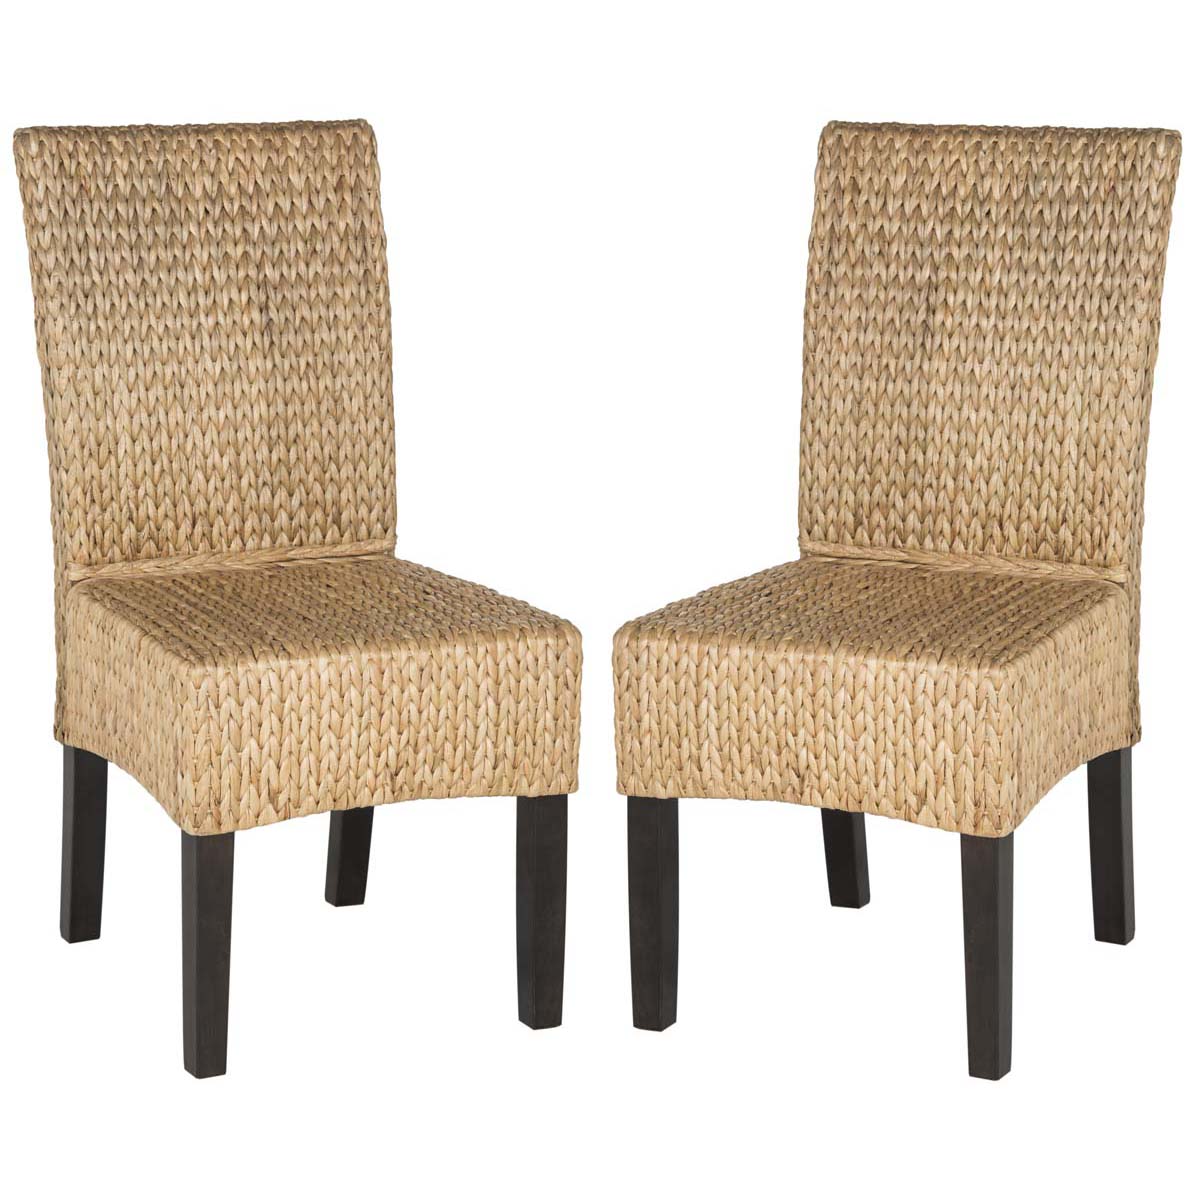 Safavieh Luz 18''H Wicker Dining Chair, SEA8016 - Natural (Set of 2)